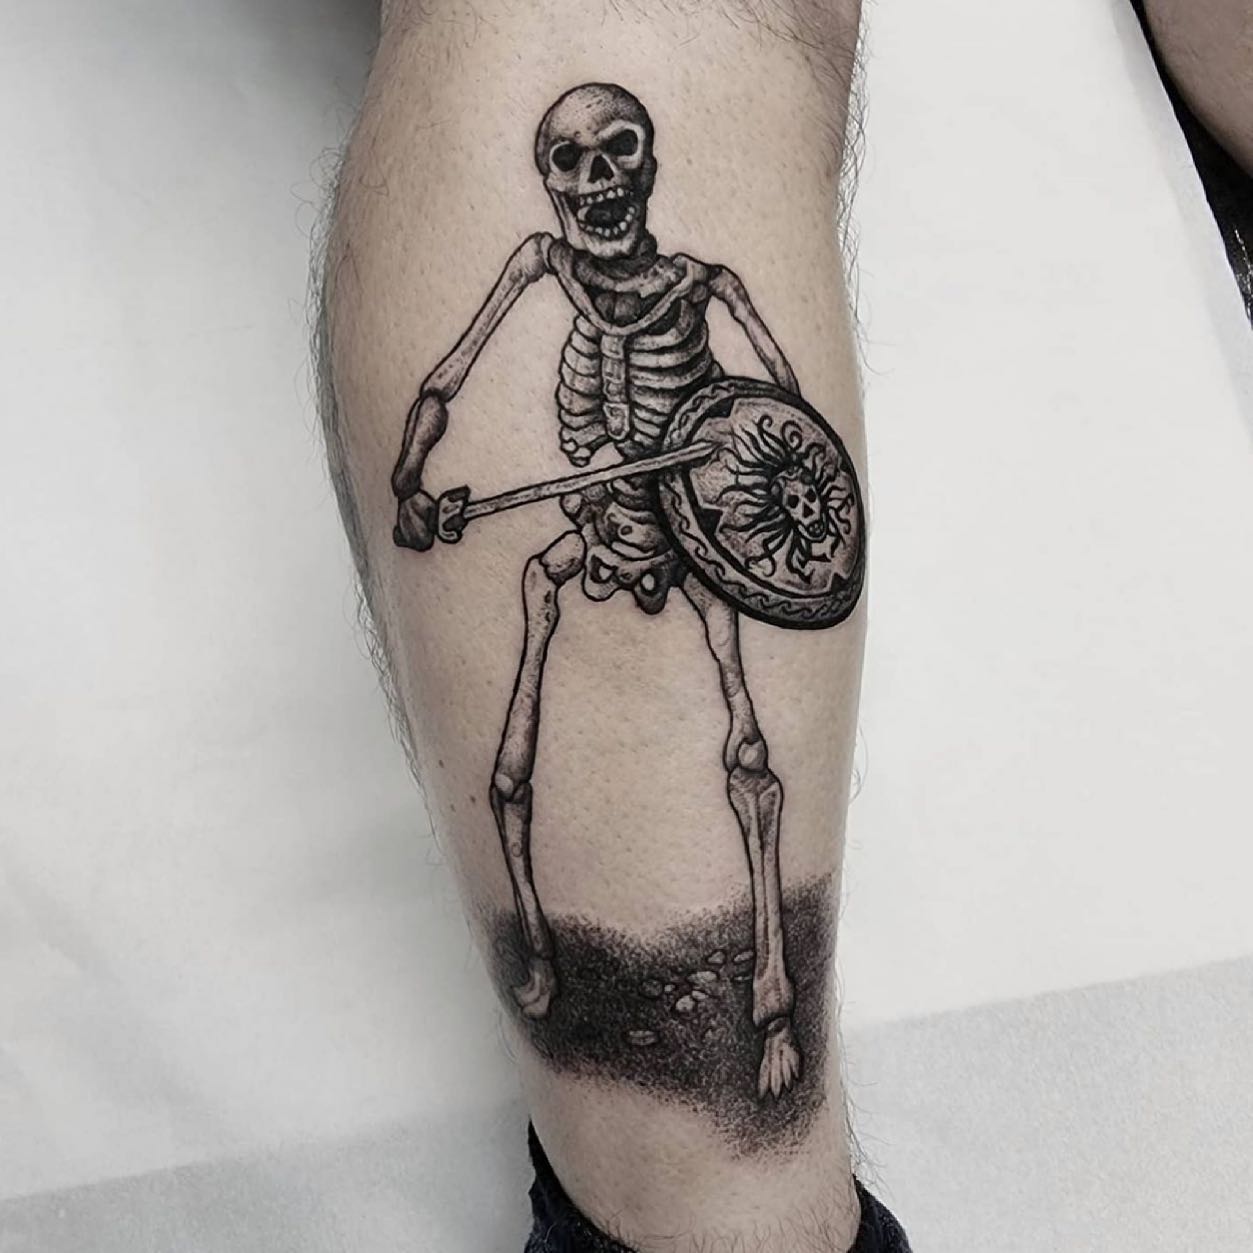 The wonderful shirleypettigrewtattoos has been killing it recently 🤯 check out her Instagram for more super cool pieces!! 🖤✨💀

If you would like to get tattooed, then please fill out the tattoo enquiry form on our website 💫

                         totaltattoo barber_dts easytattoo_uk eternalink dynamiccolor lockdownneedle stencilstuff
      